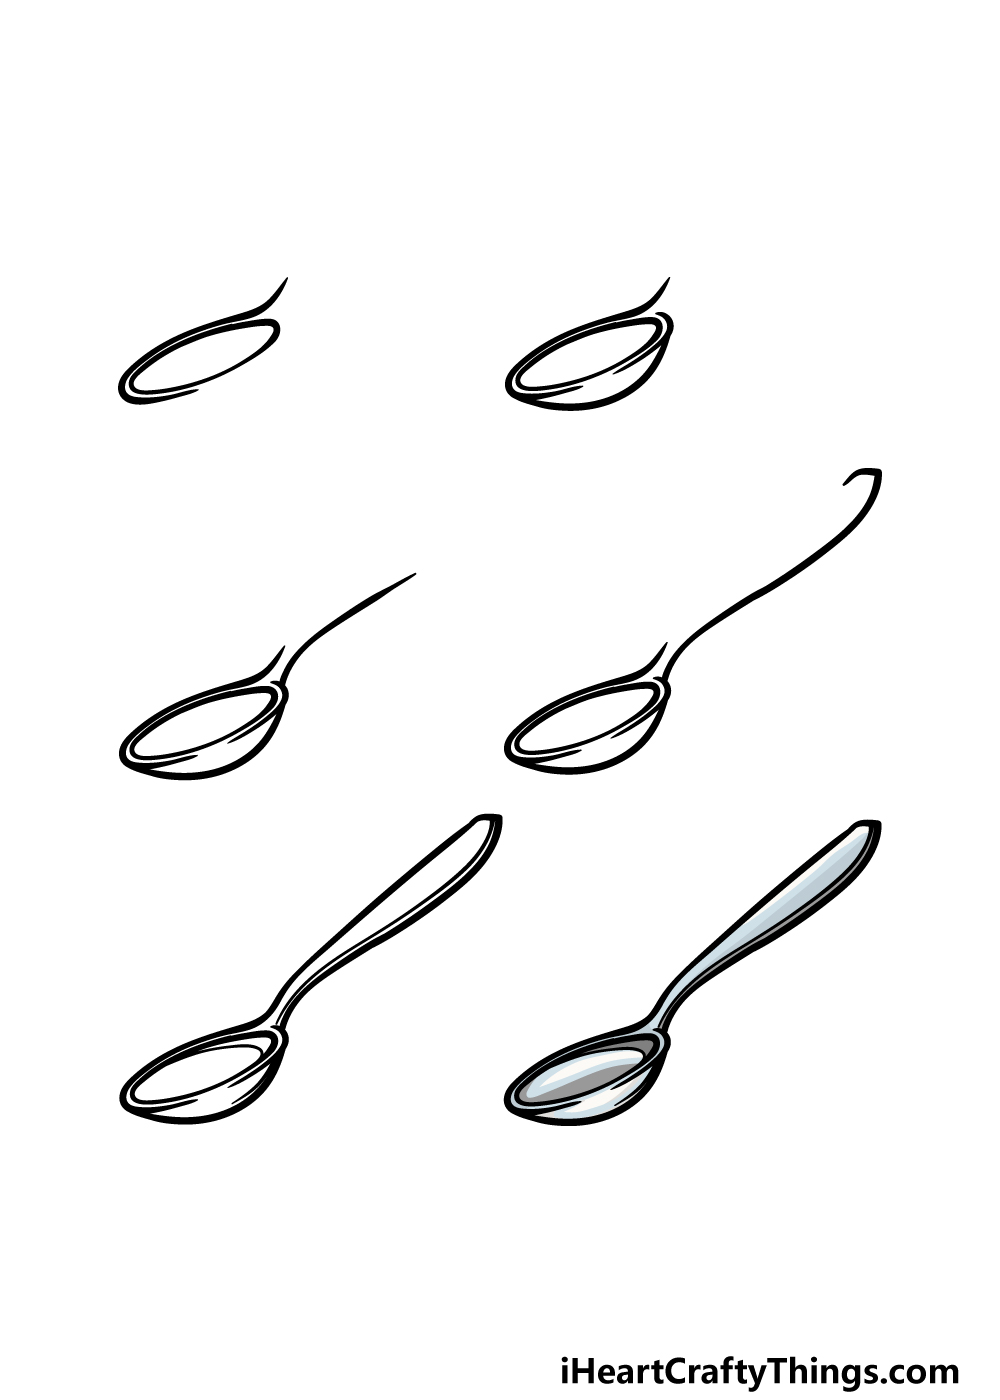 how to draw a spoon in 6 steps